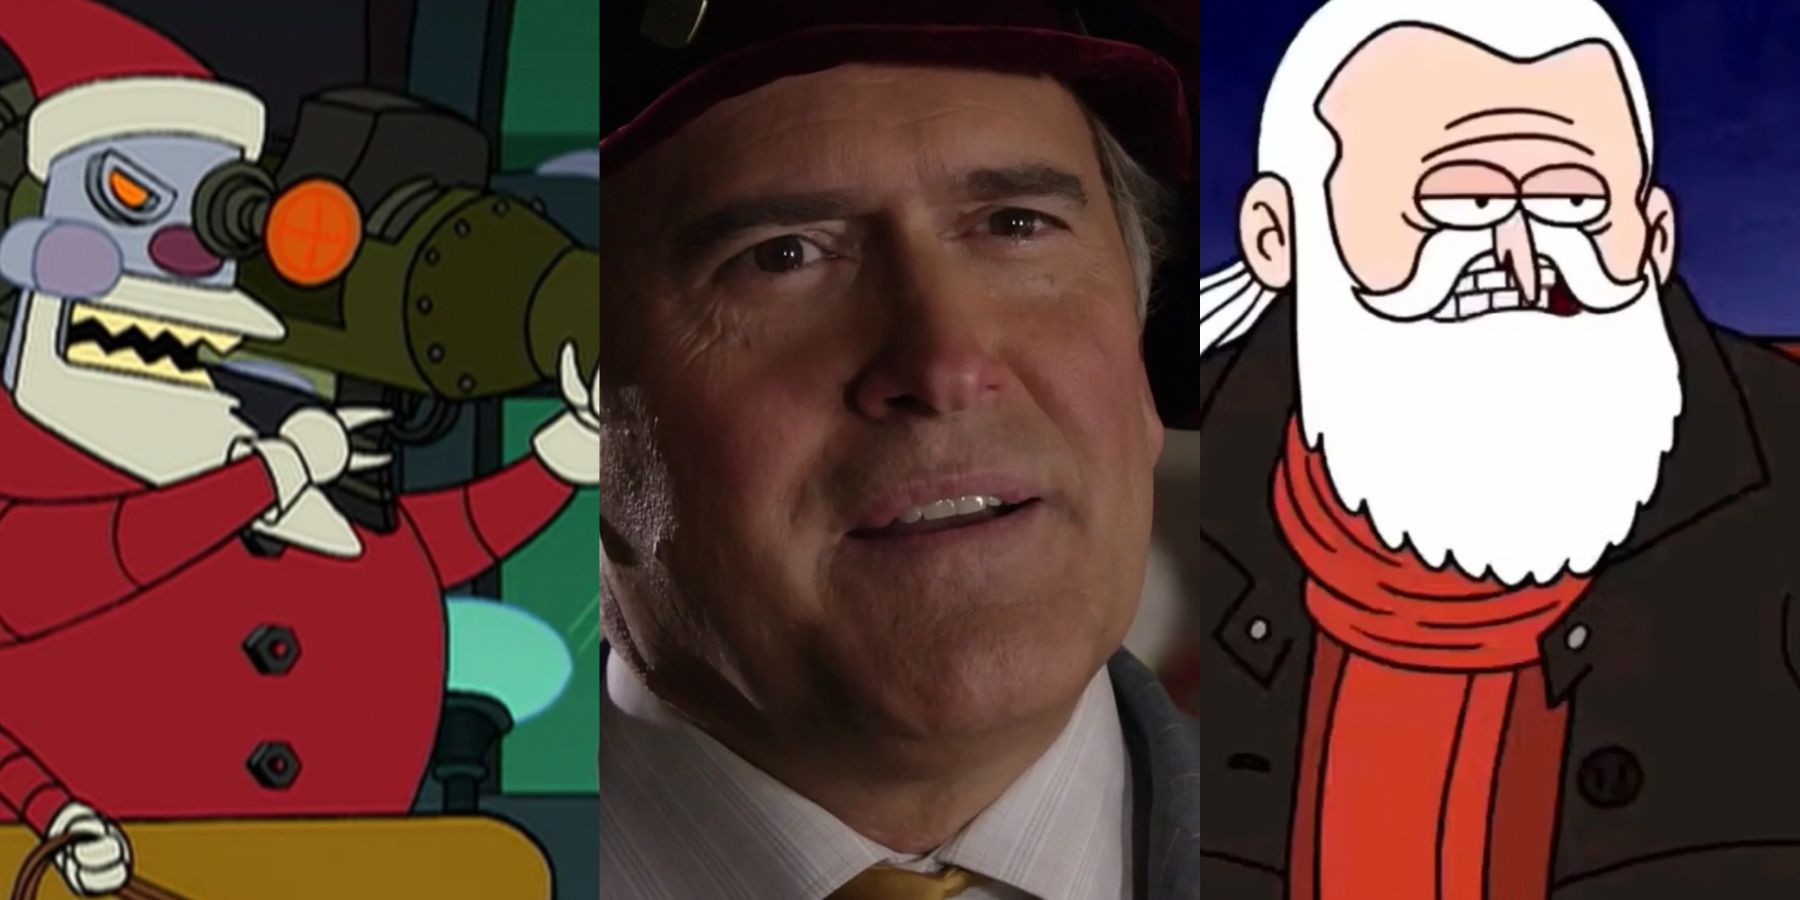 A split image features the TV versions of Santa Claus in Futurama, The Librarians, and Regular Show